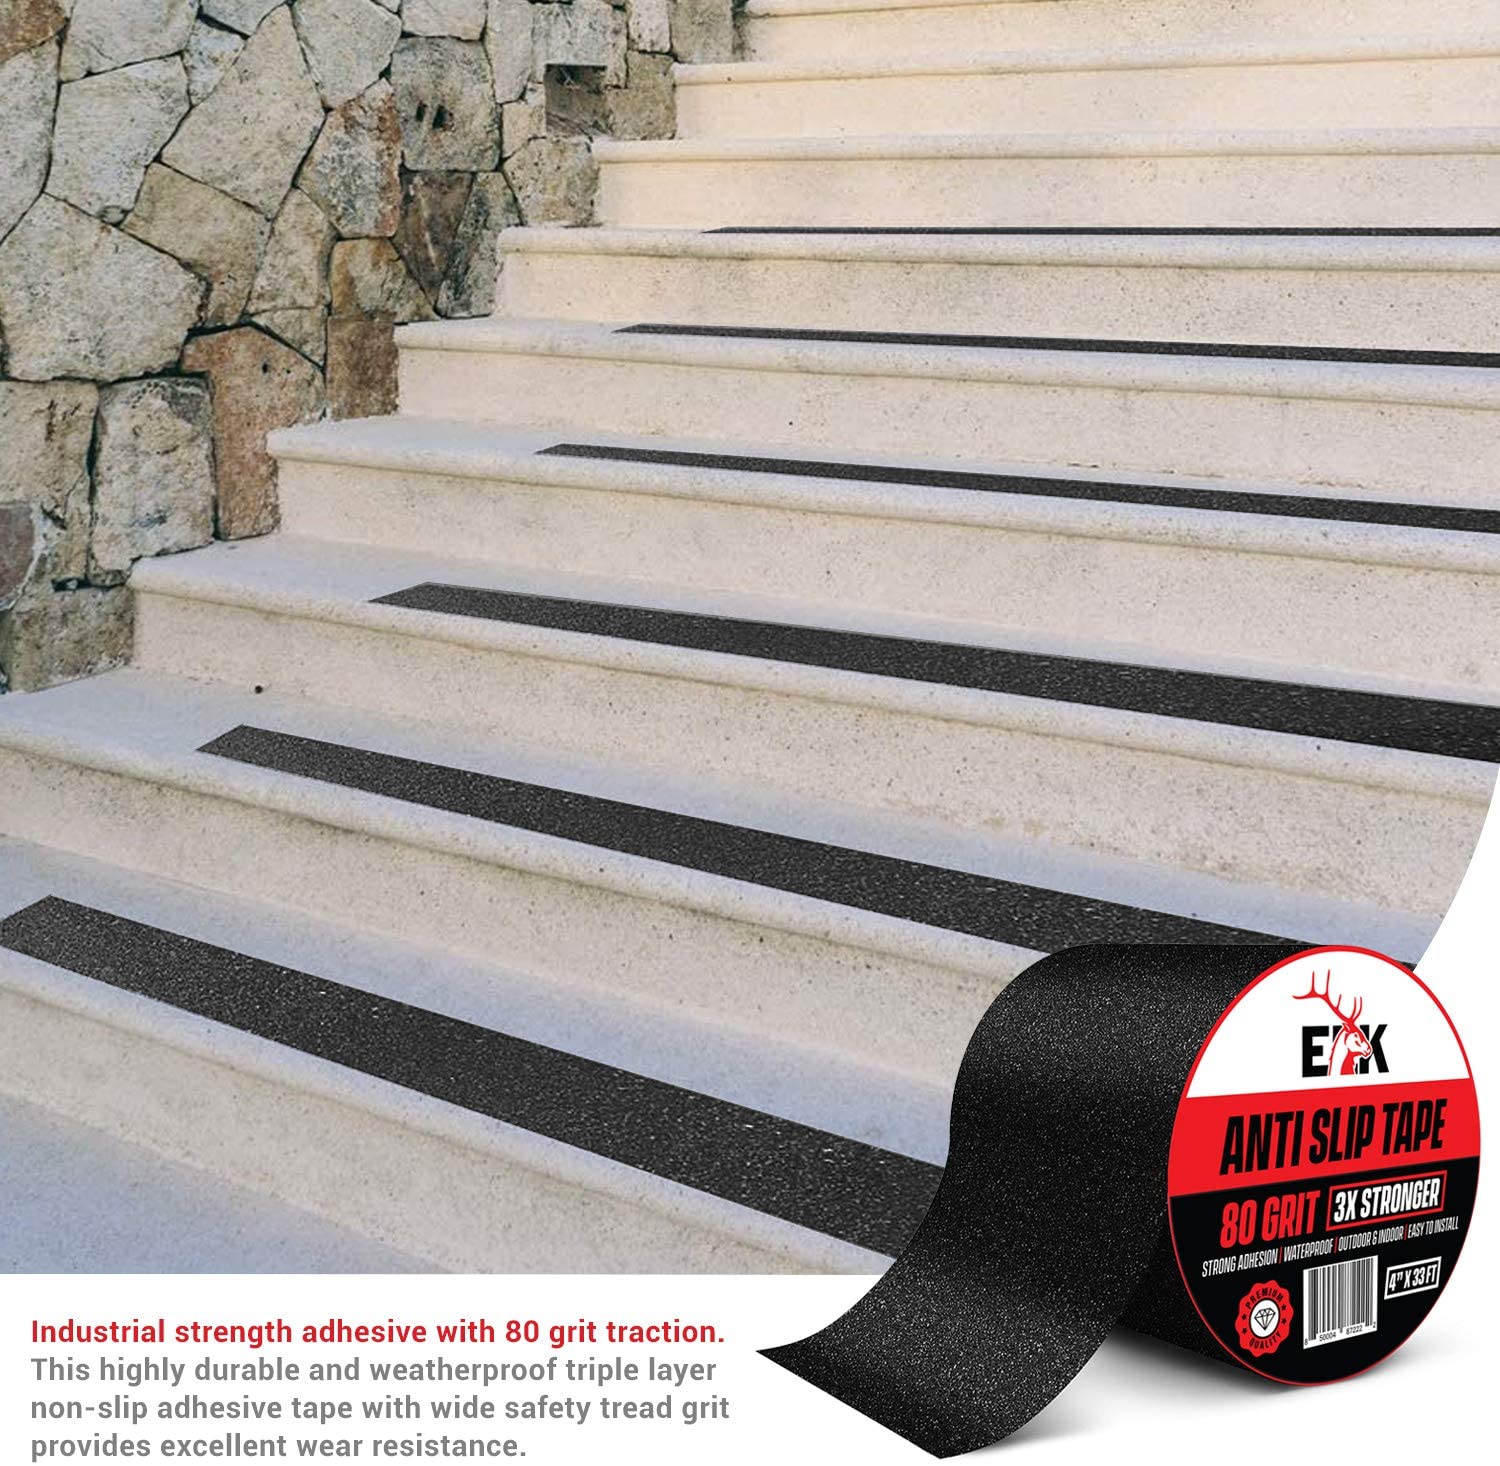 KABB Anti Slip Traction Tape with Reflective Stripe, 4 Inch x 33 Foot, Best Grip  Tape Grit Non Slip, Outdoor Non Skid Treads, High Traction Friction  Abrasive Adhesive for Stairs Step, Black 